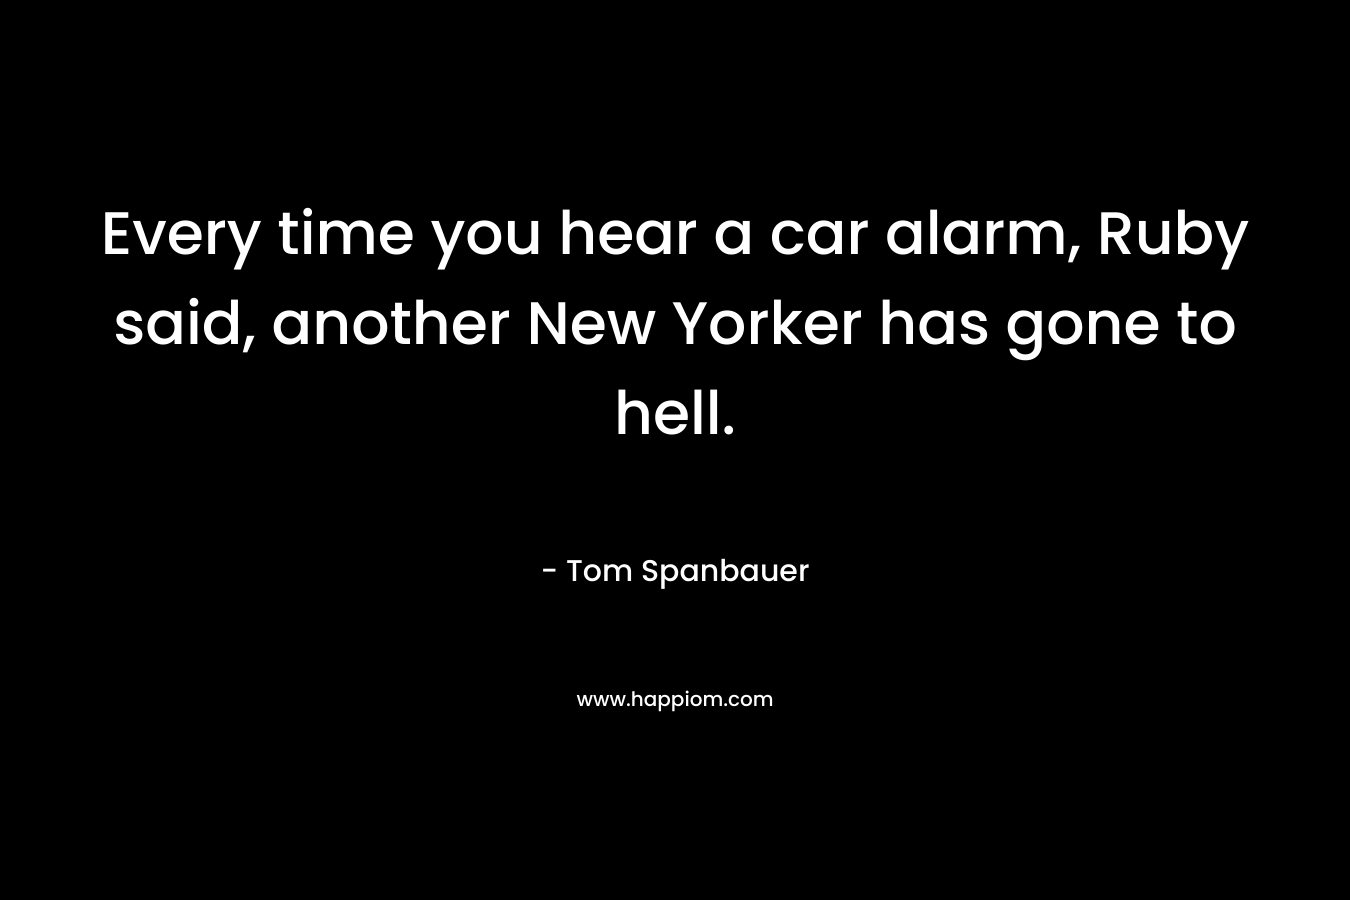 Every time you hear a car alarm, Ruby said, another New Yorker has gone to hell. – Tom Spanbauer